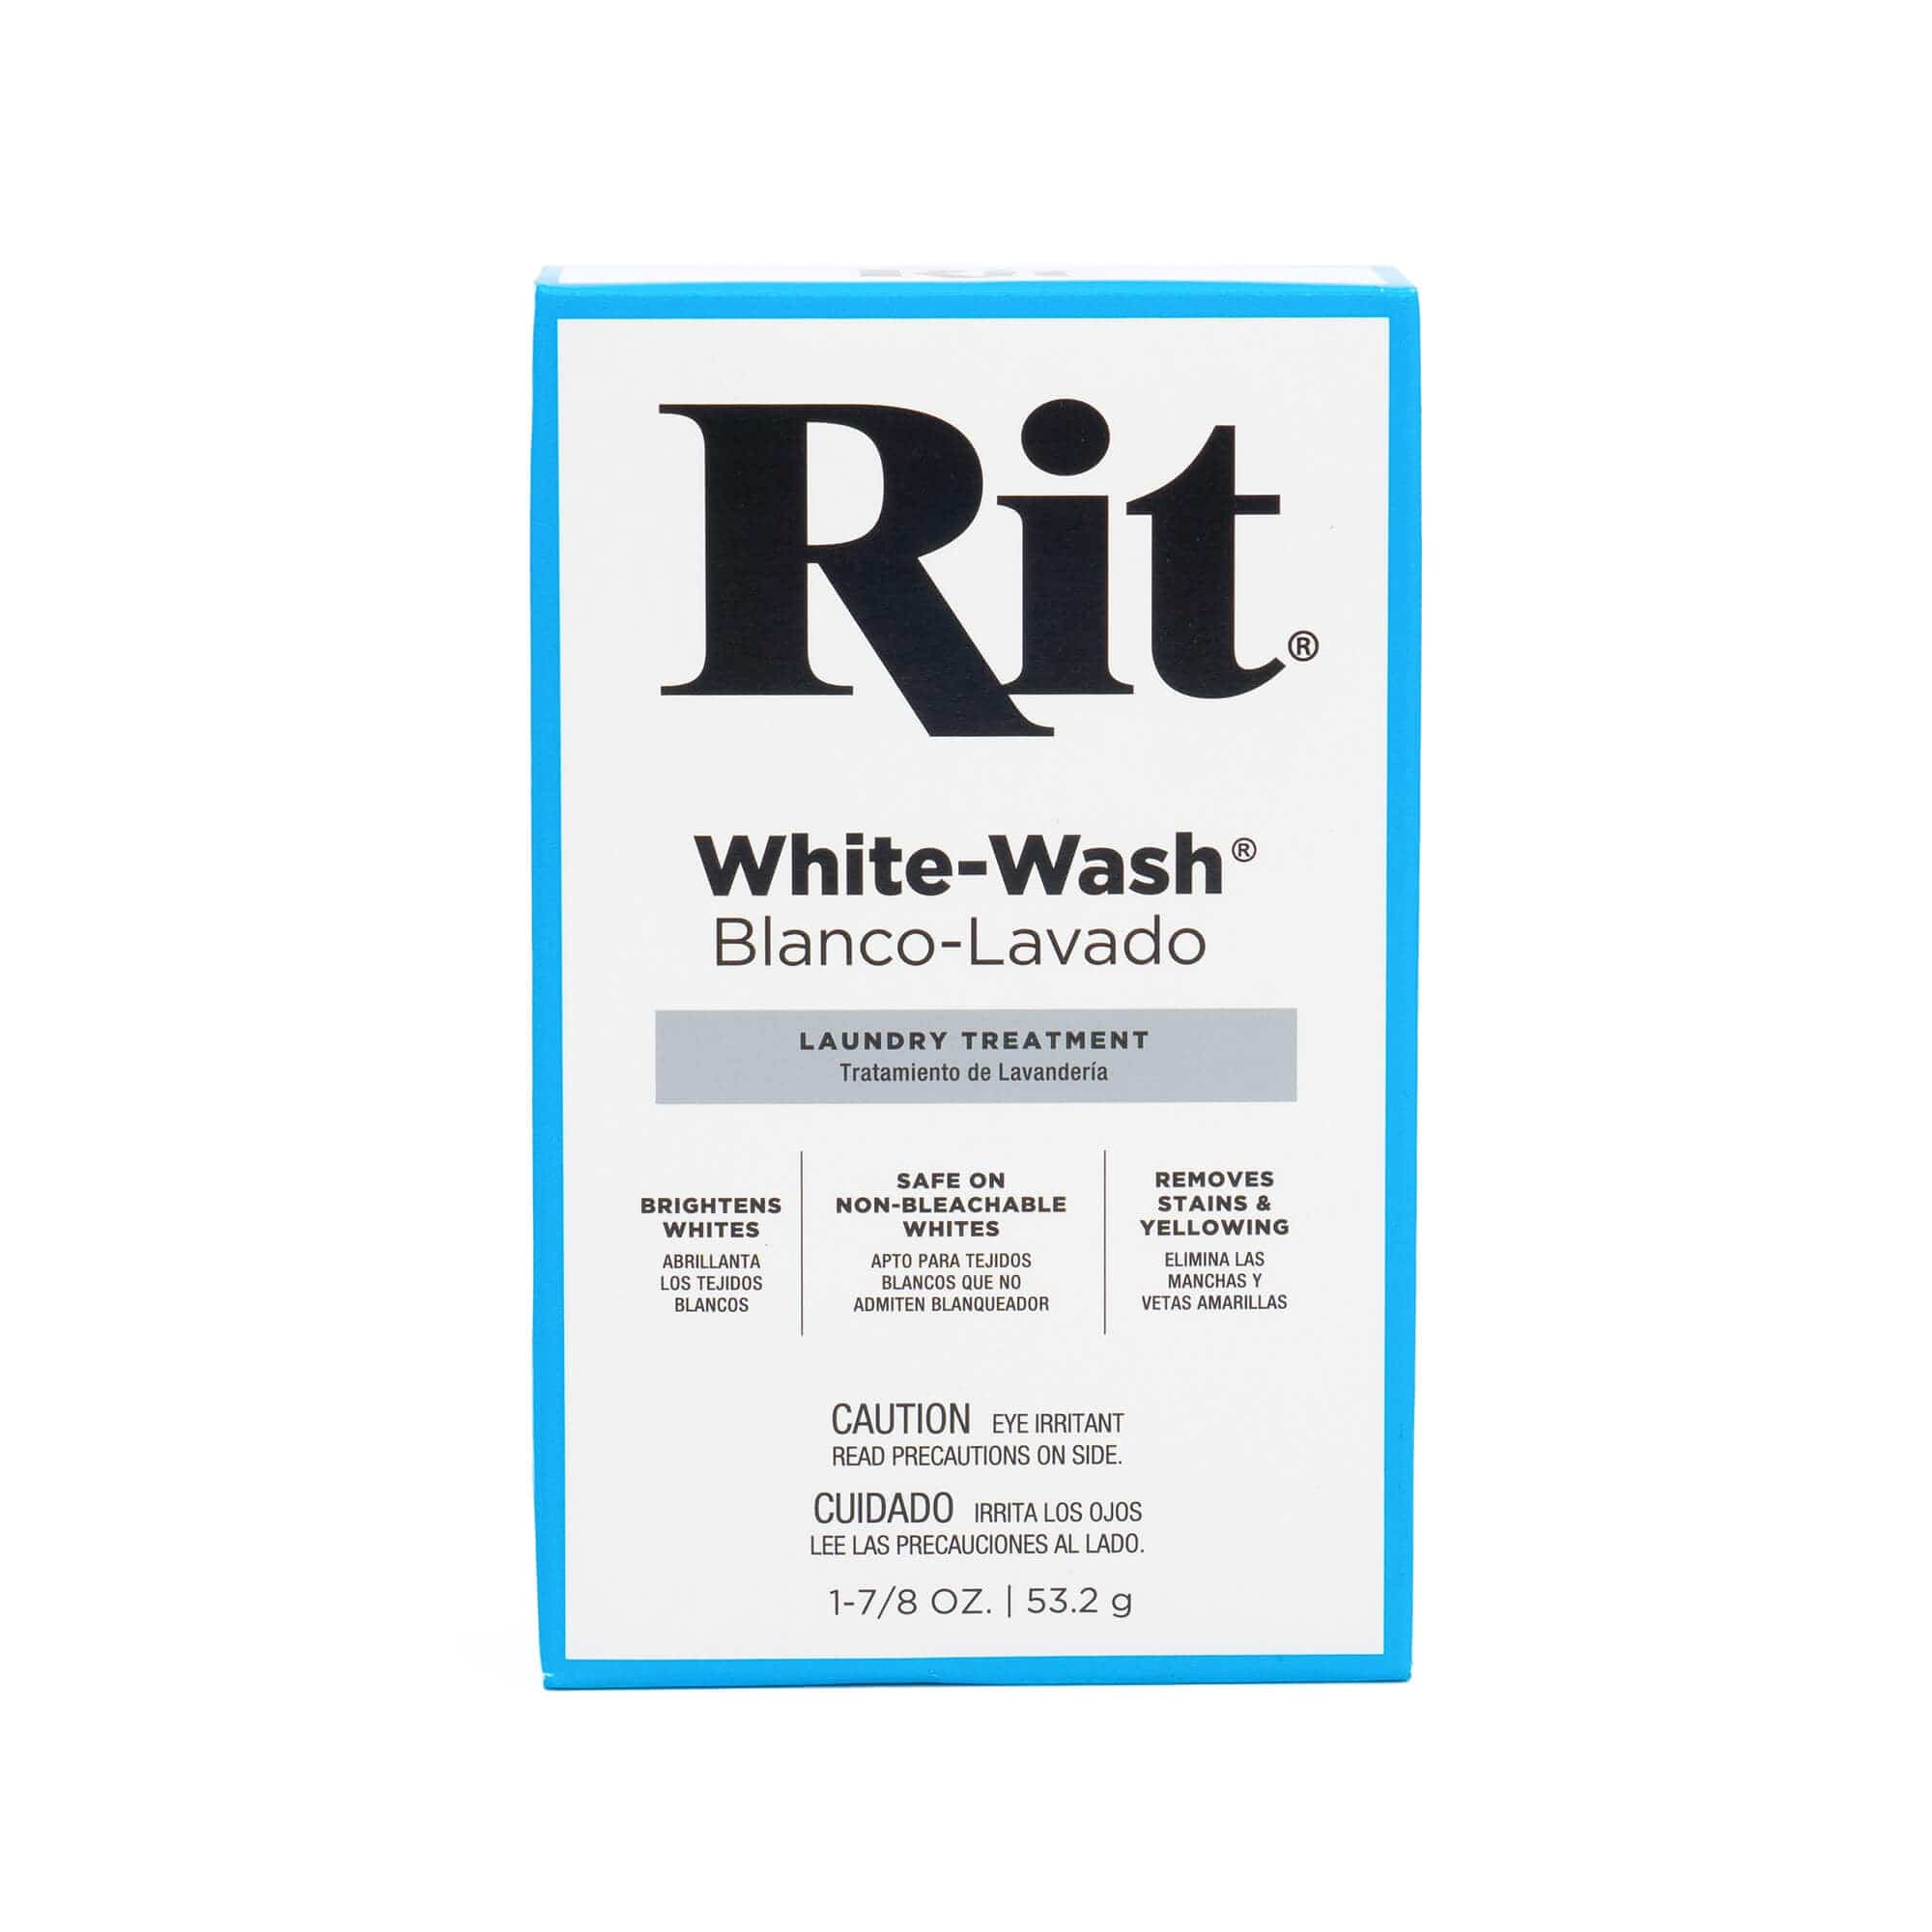 Review for OUT White Brite Laundry Whitener Powder 